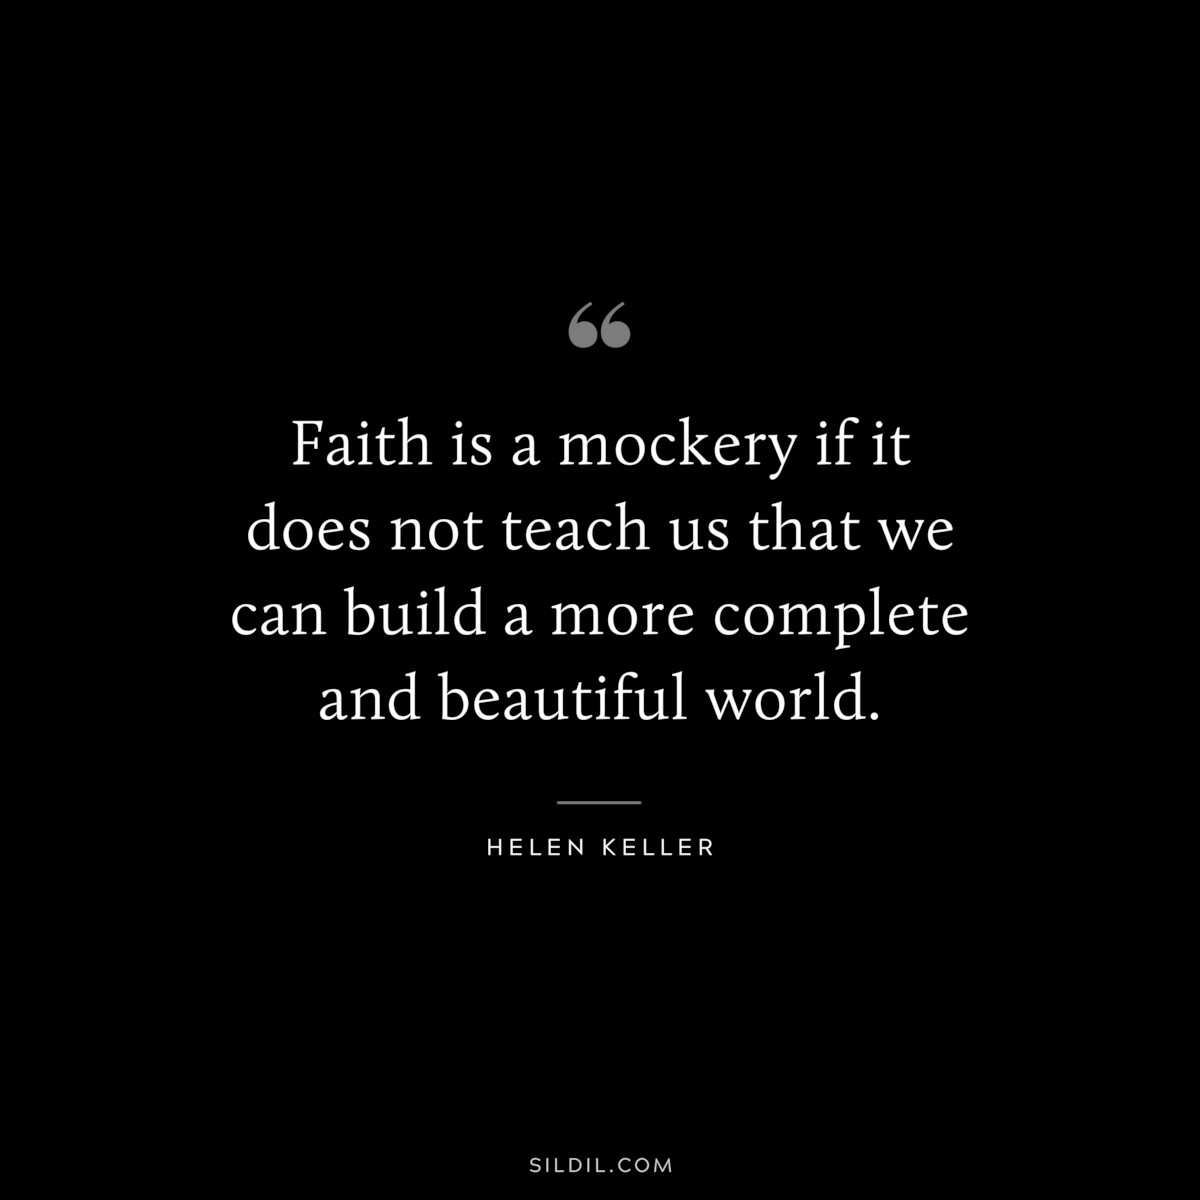 Faith is a mockery if it does not teach us that we can build a more complete and beautiful world. ― Helen Keller